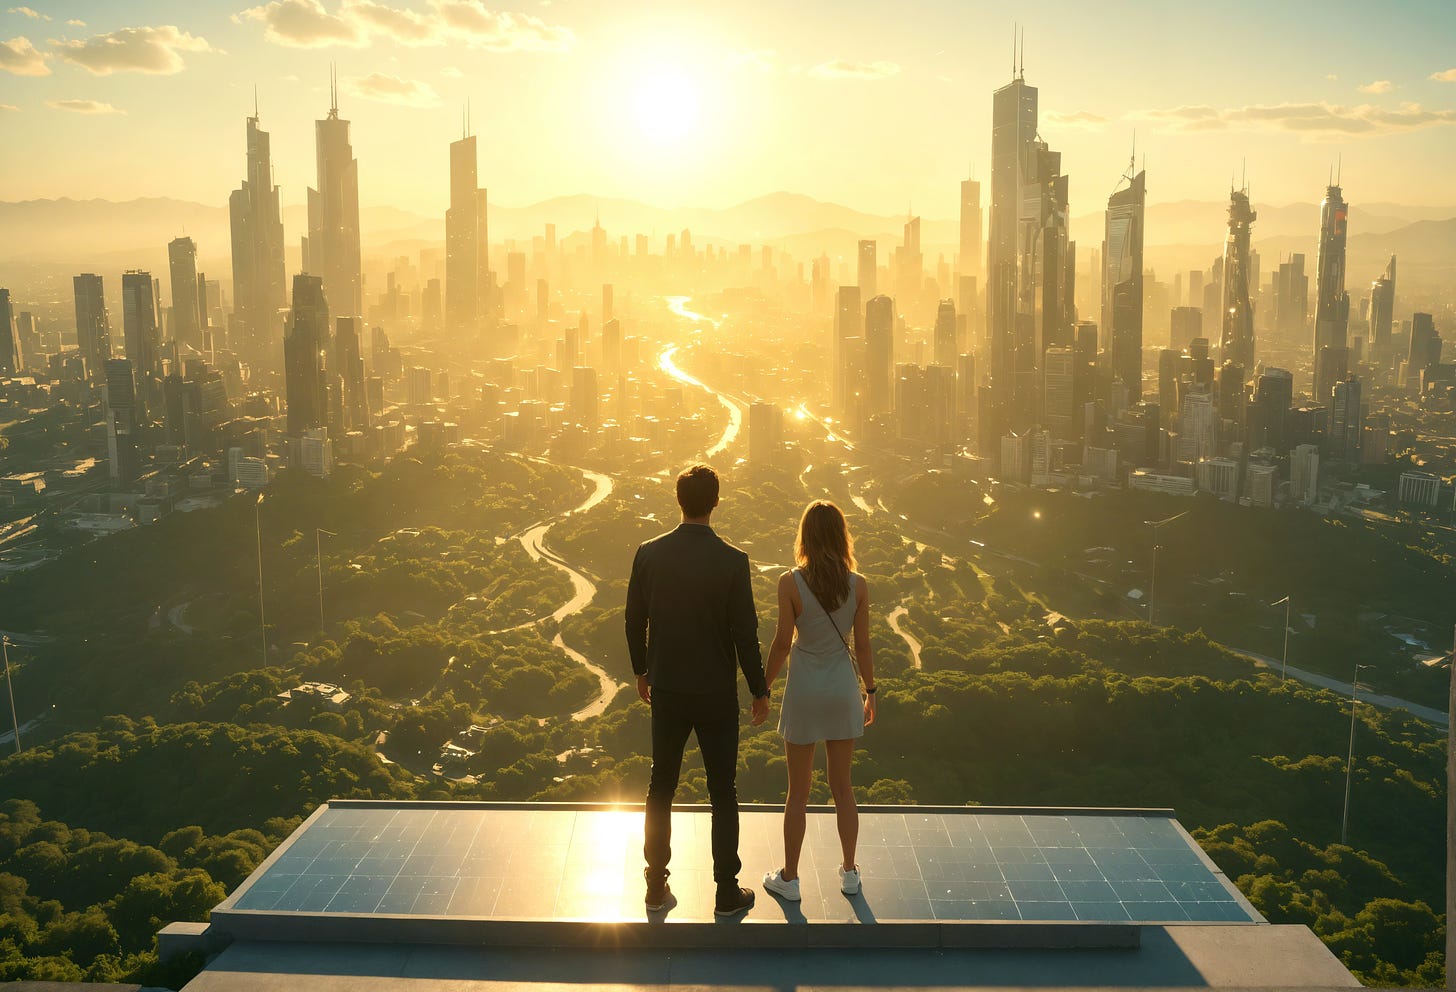 sci-fi movie still, wide-angle cinematic, a man and a woman wearing clean and simple clothes stand on a high ledge looking down over a futuristic city with tall white skyscrapers and covered with trees, solar panels, and wind turbines, bright golden sunlight with lens flare, hopeful and positive